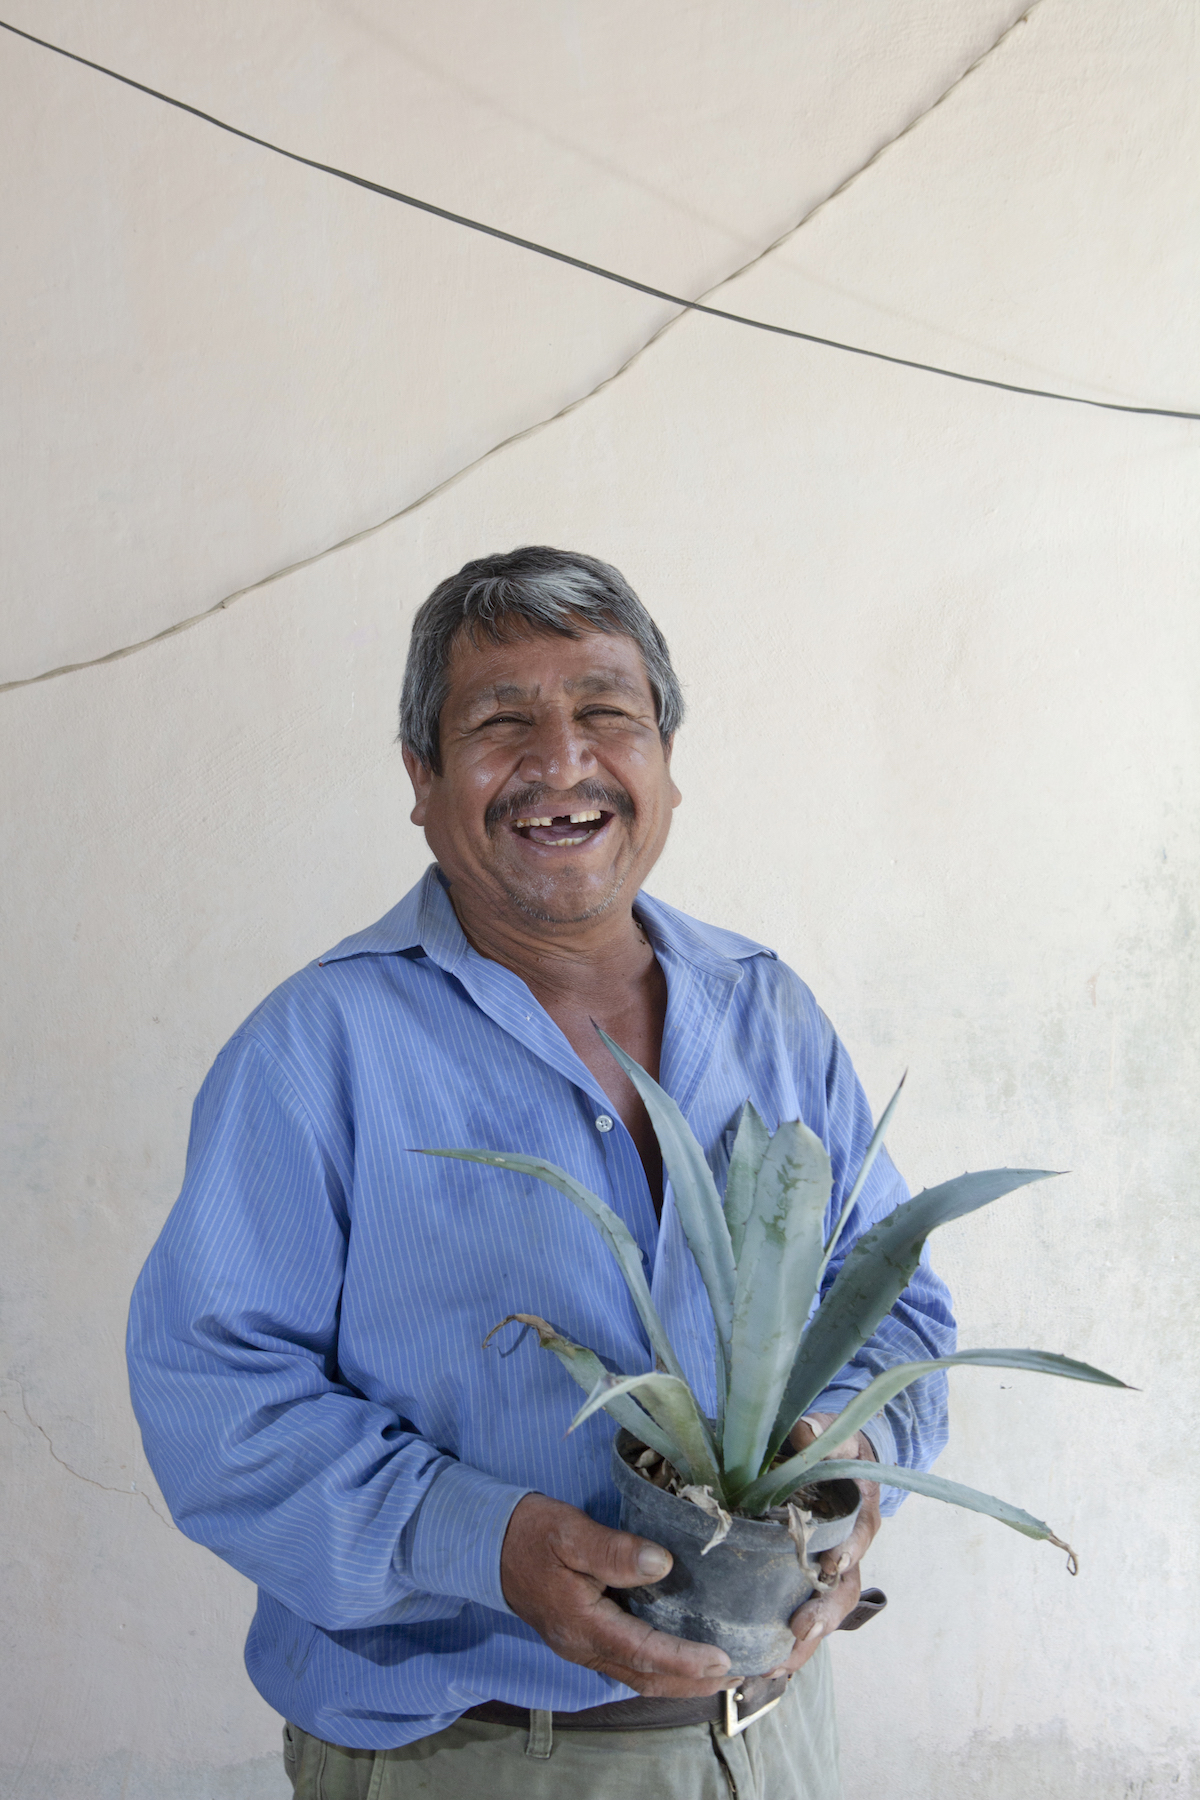 A smiling man holds a small plant in a pot.